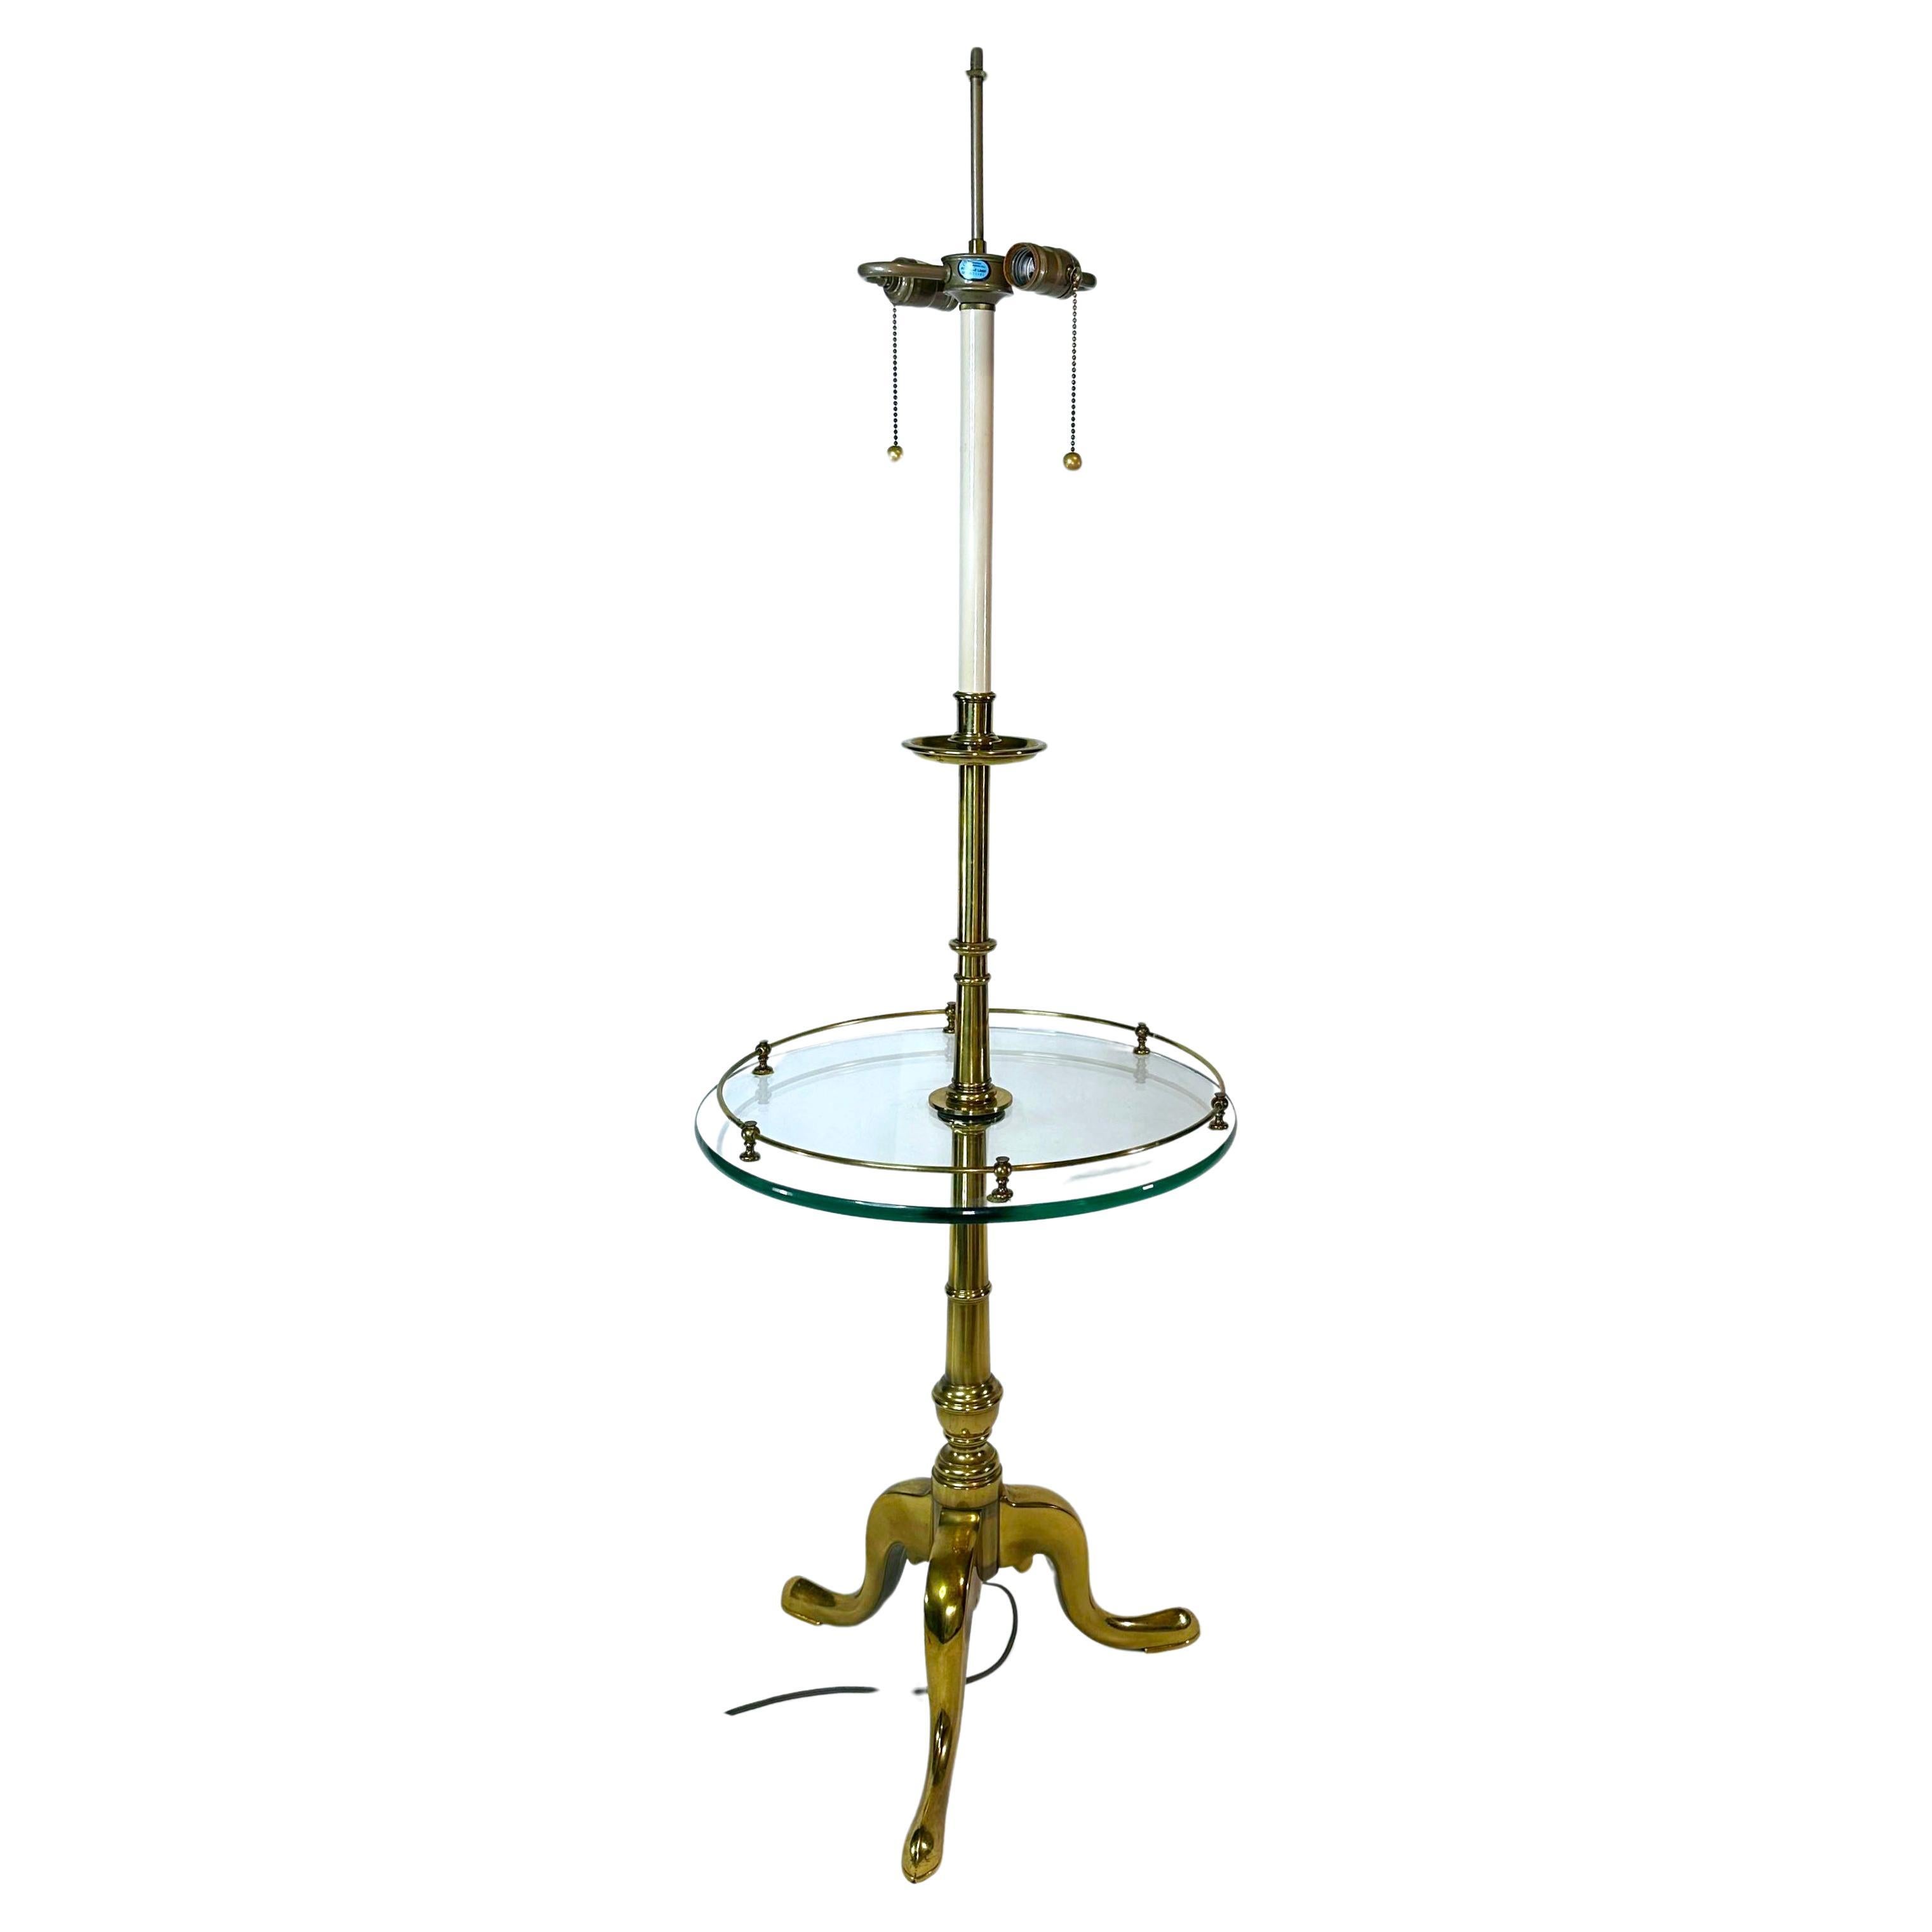 French Provincial Stiffel Floor Lamp With Glass Table and tripod legs For Sale